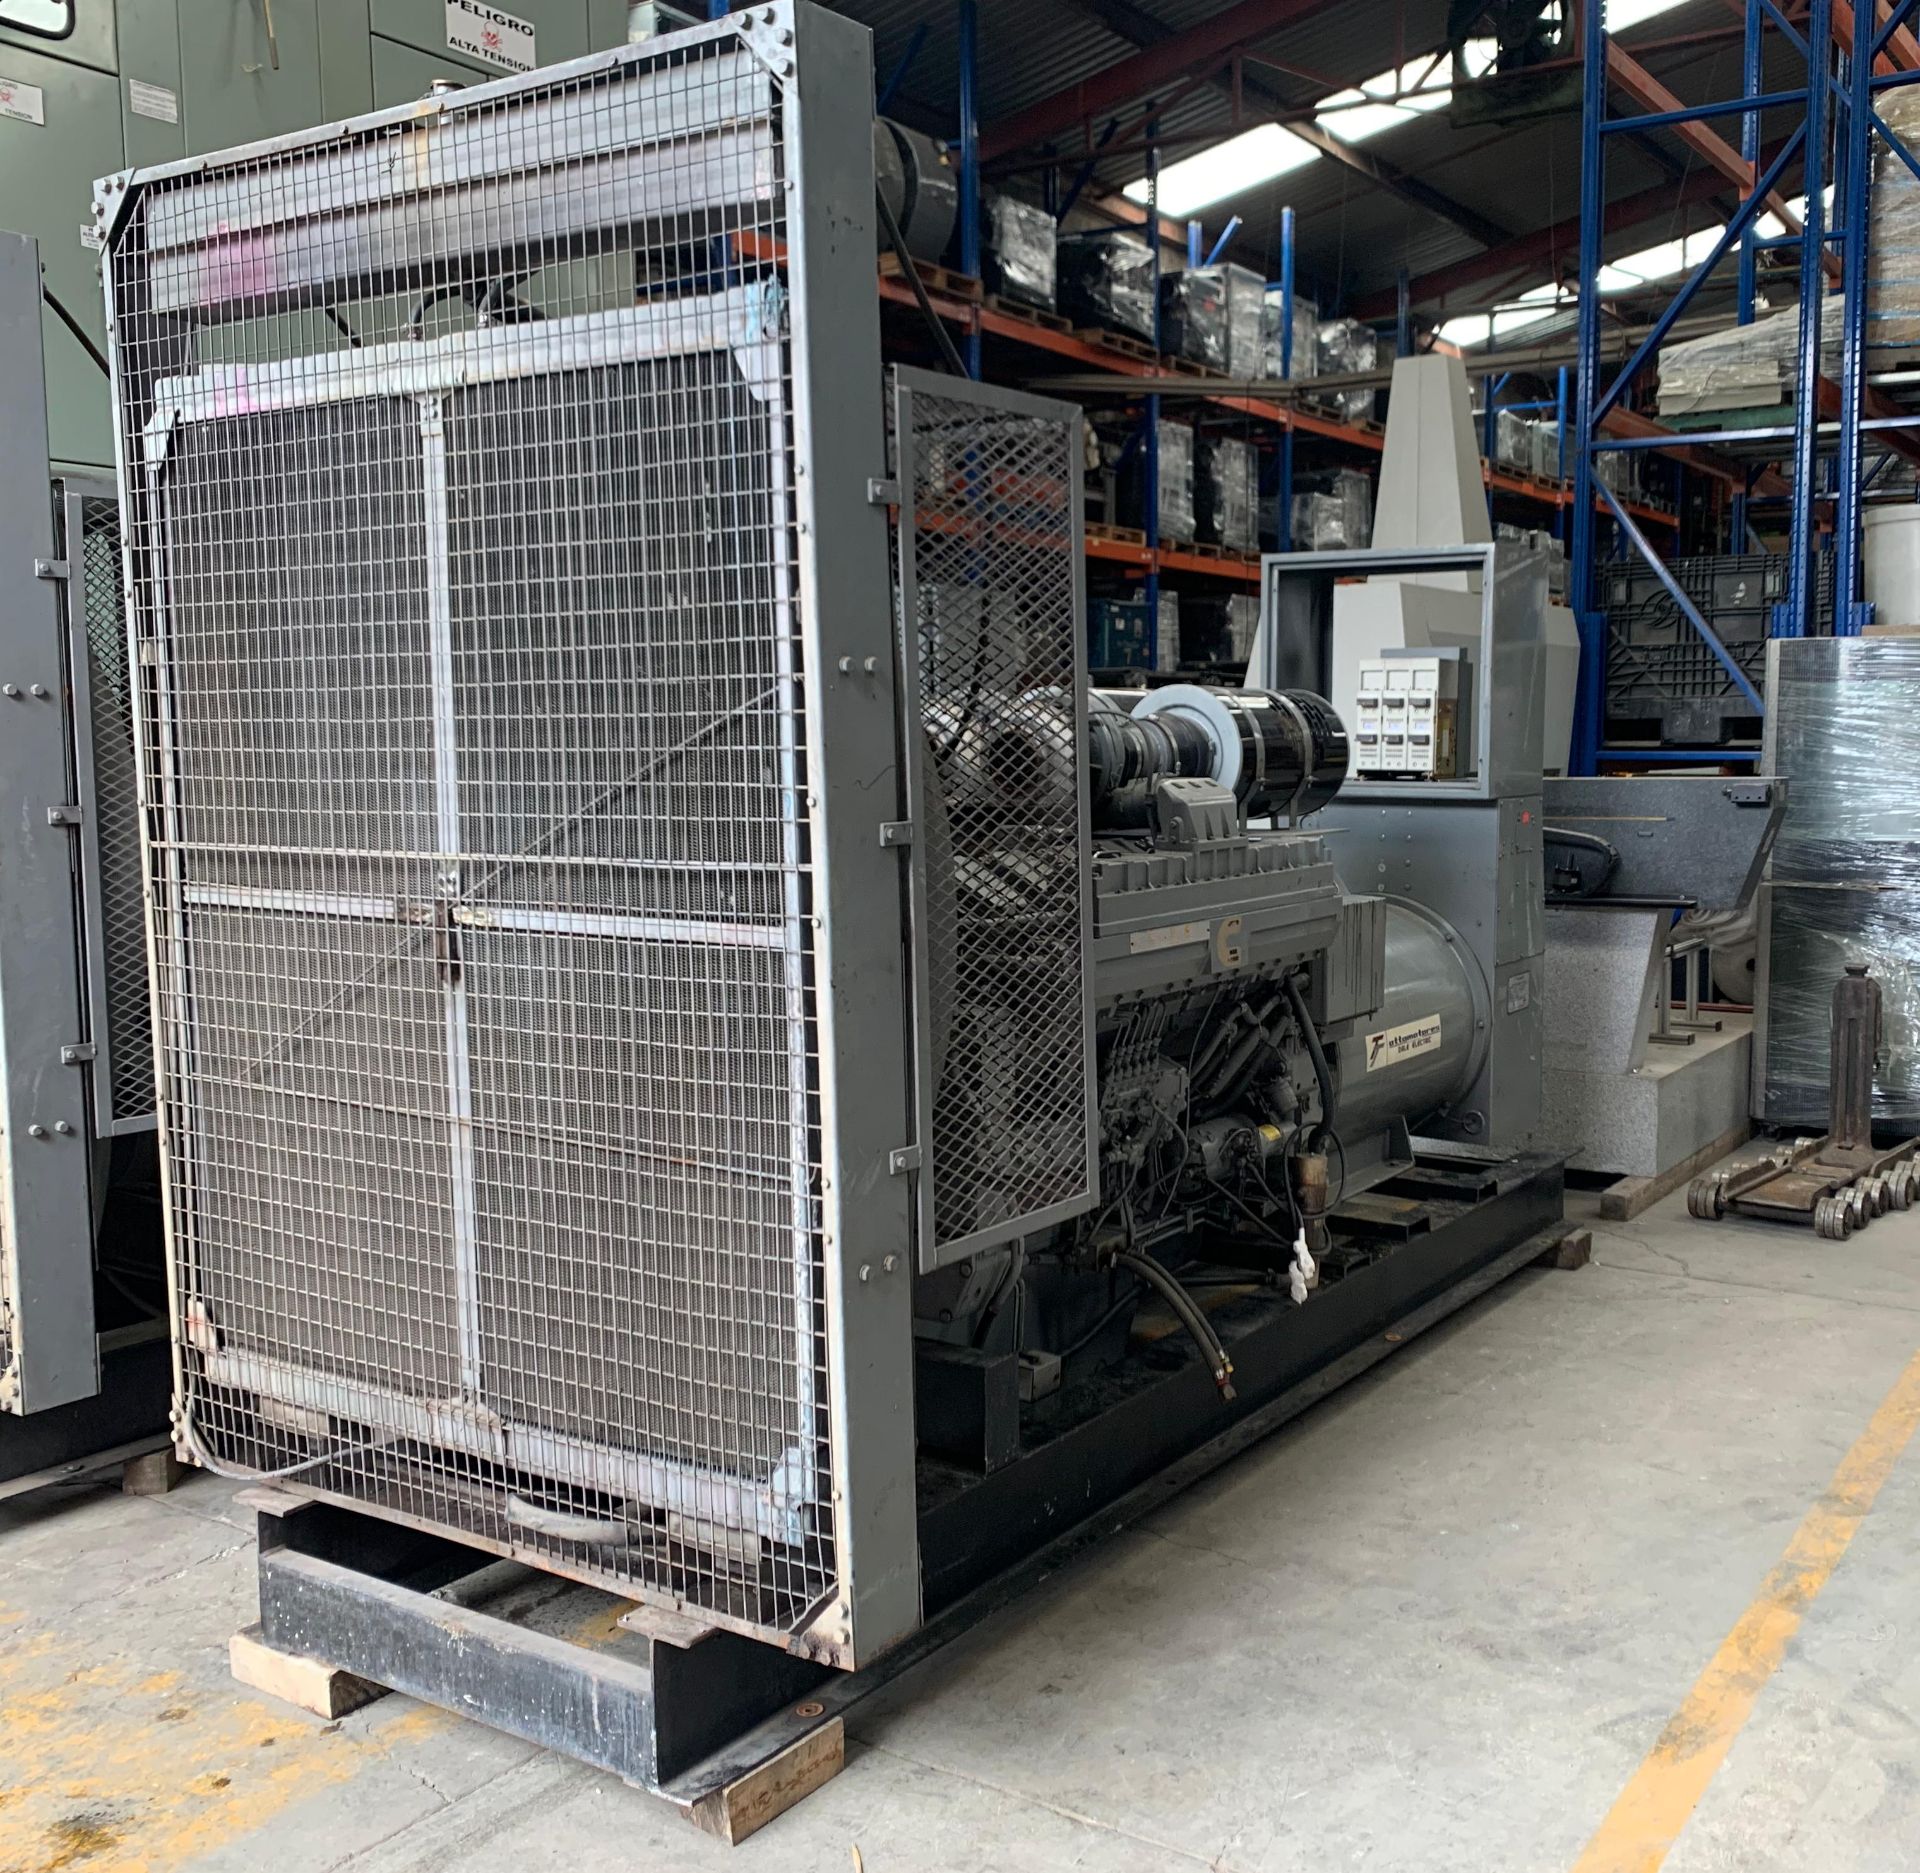 Ottomotores Emergency Power Plant of 910 kW and 1138 kVA, voltage 220 / 440